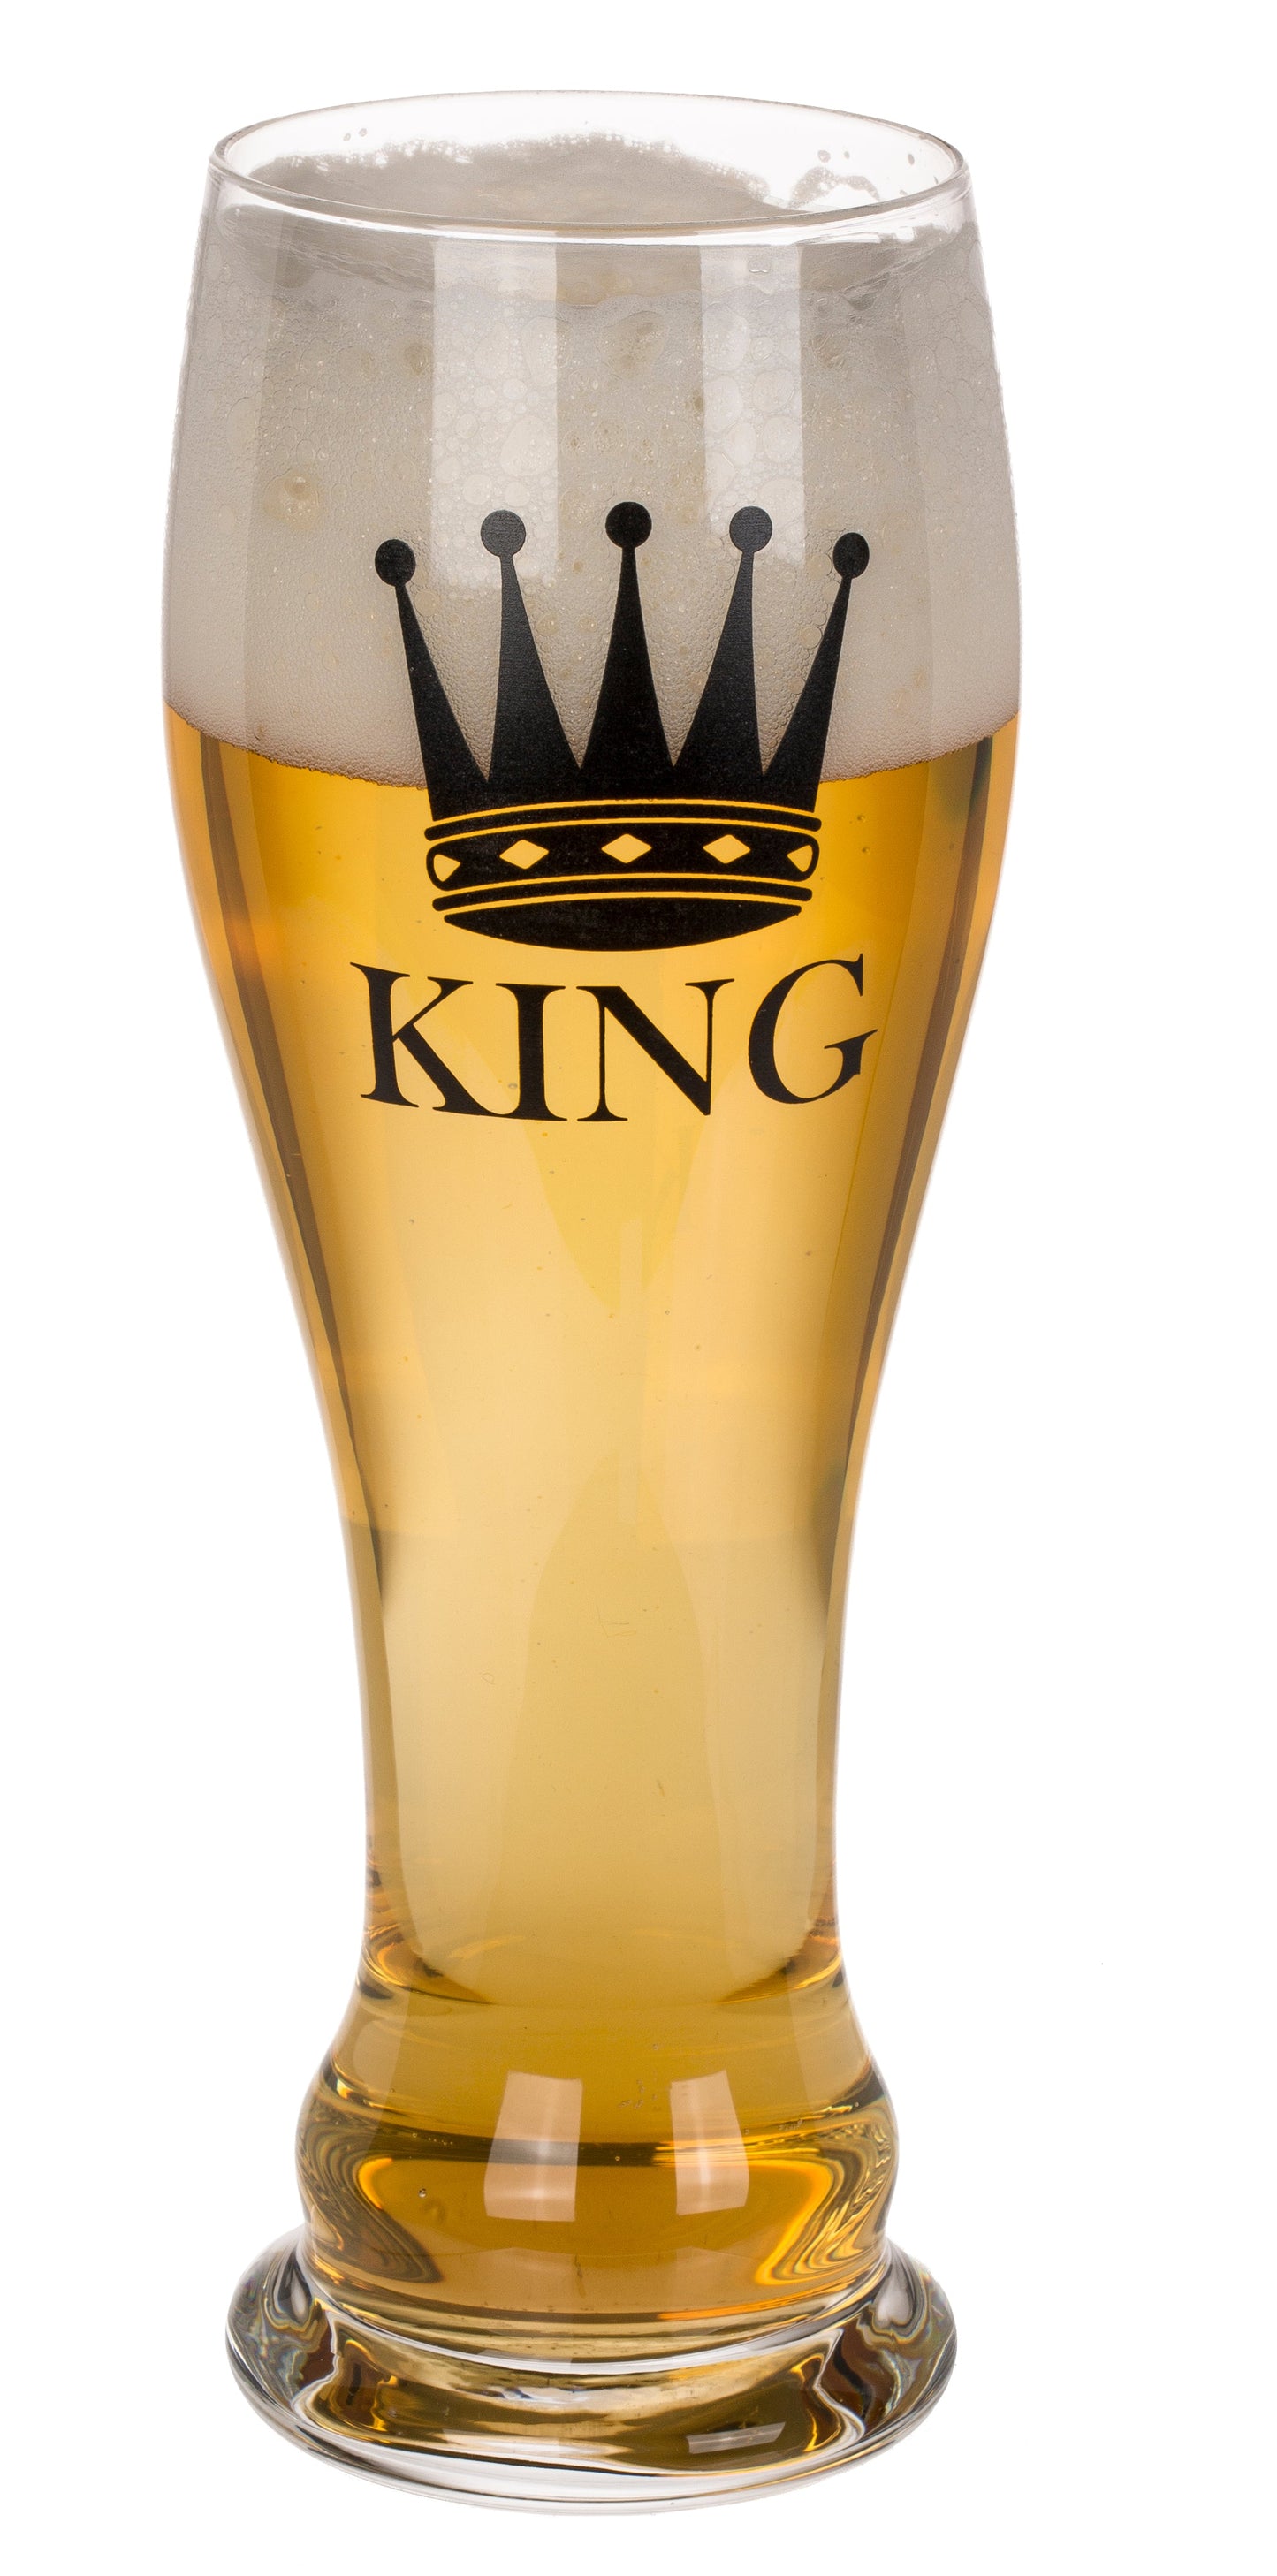 Set of Beer and Wine Glass - King and Queen